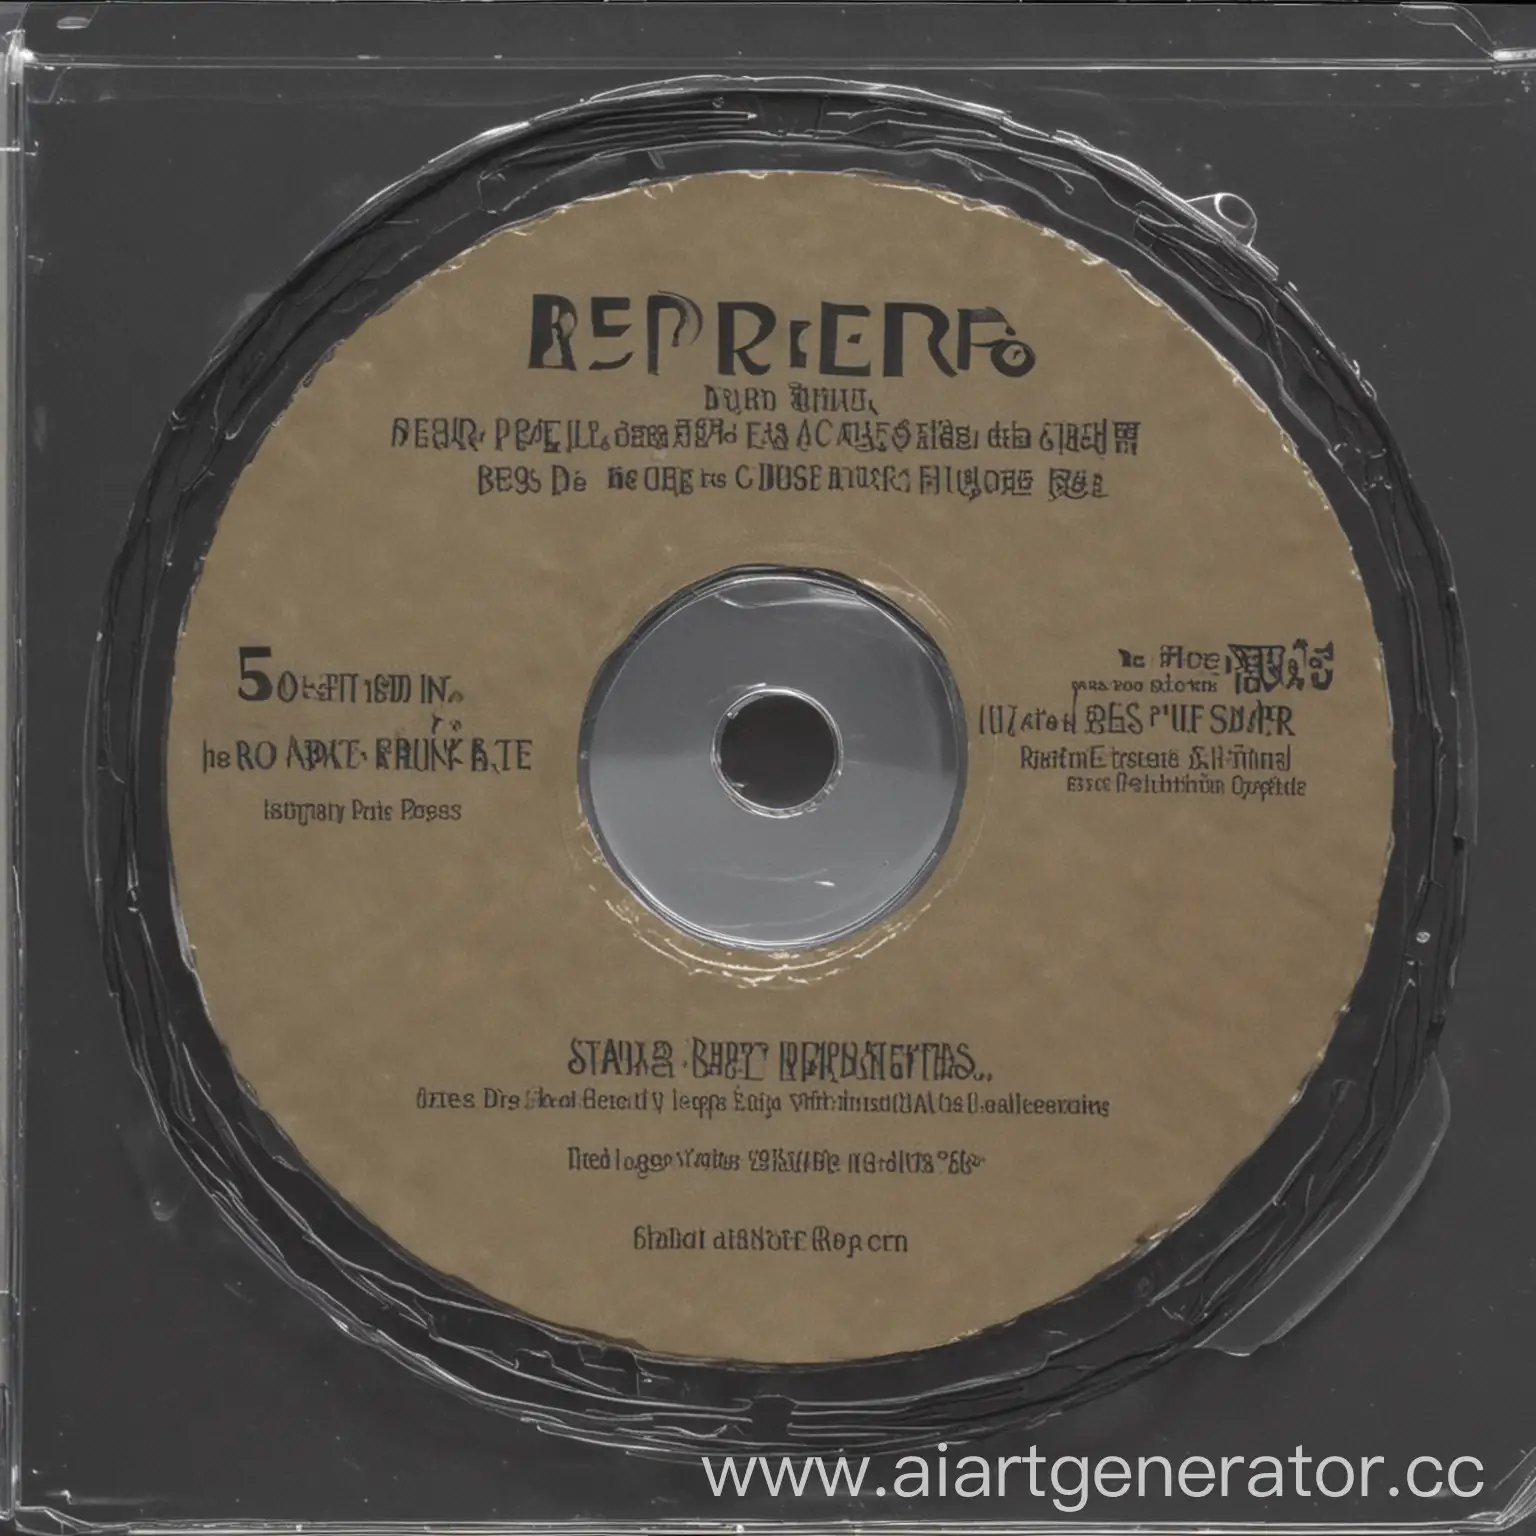 cd disc with text "EEPEE" and "RRR"